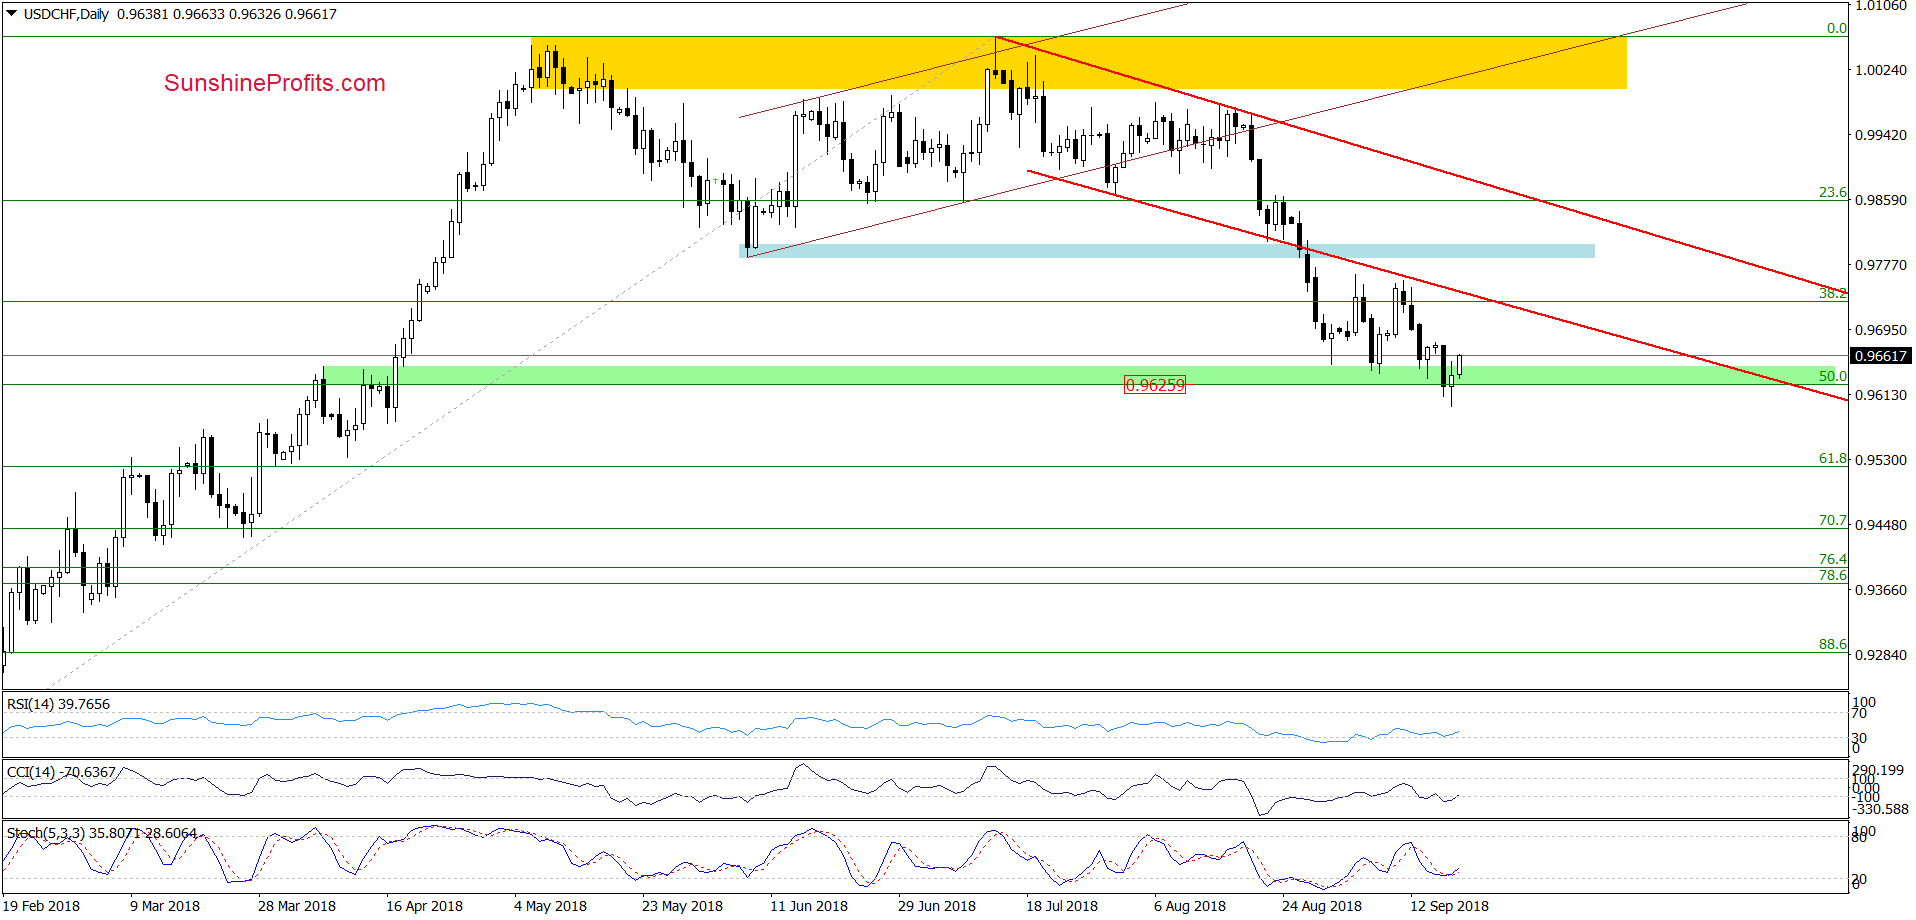 USD/CHF - daily chart